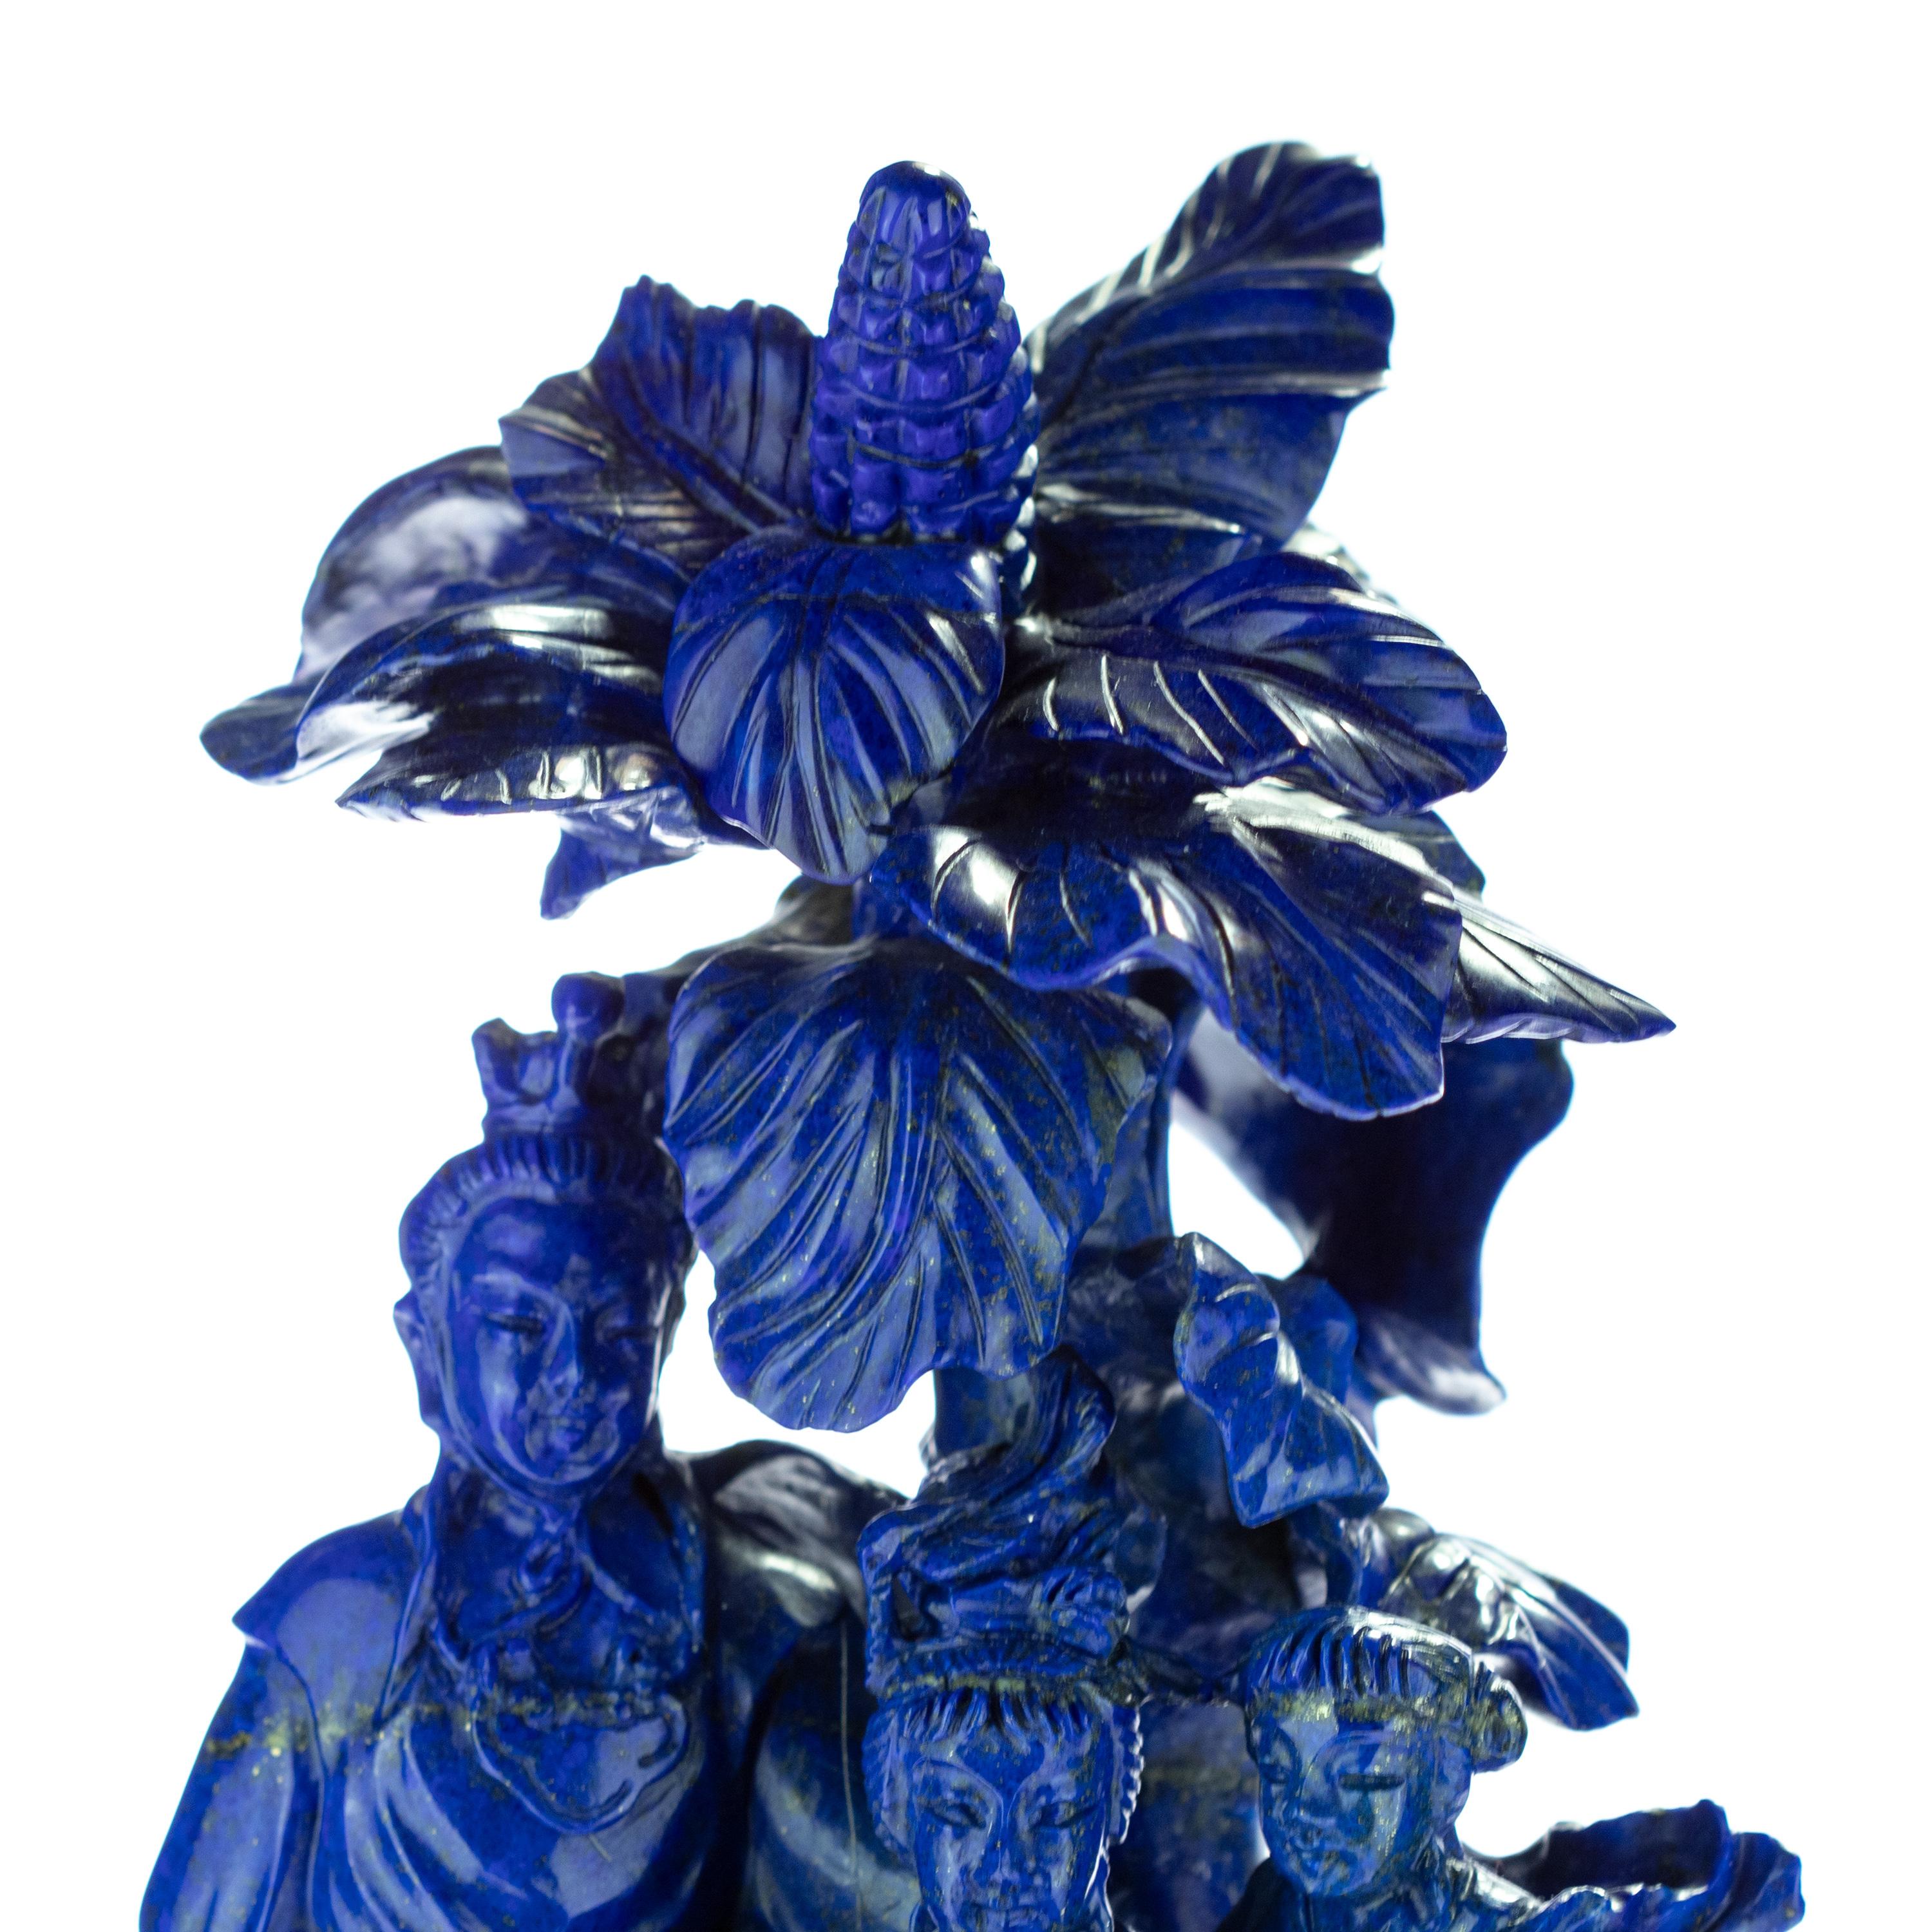 Lapis Lazuli Imperial Family Carved Flower Gemstone Asian Art Statue Sculpture In Excellent Condition For Sale In Milano, IT